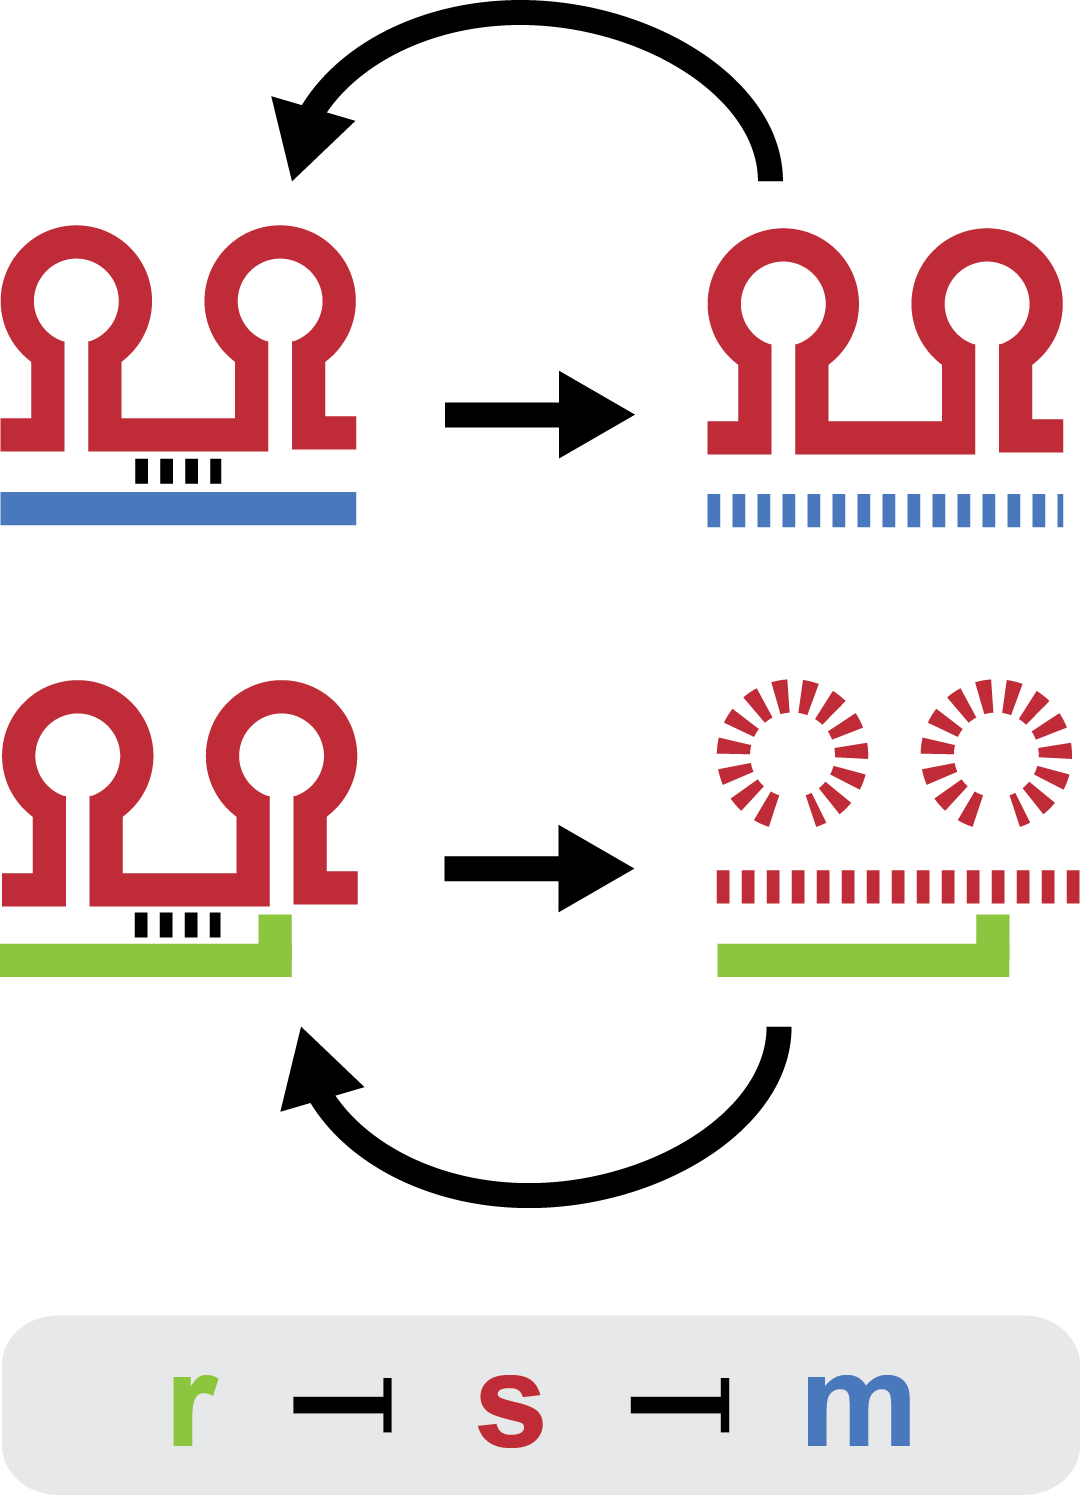 Two-level sRNA regulation. Blue is any target mRNA, red is sRNA and green is trap-RNA.